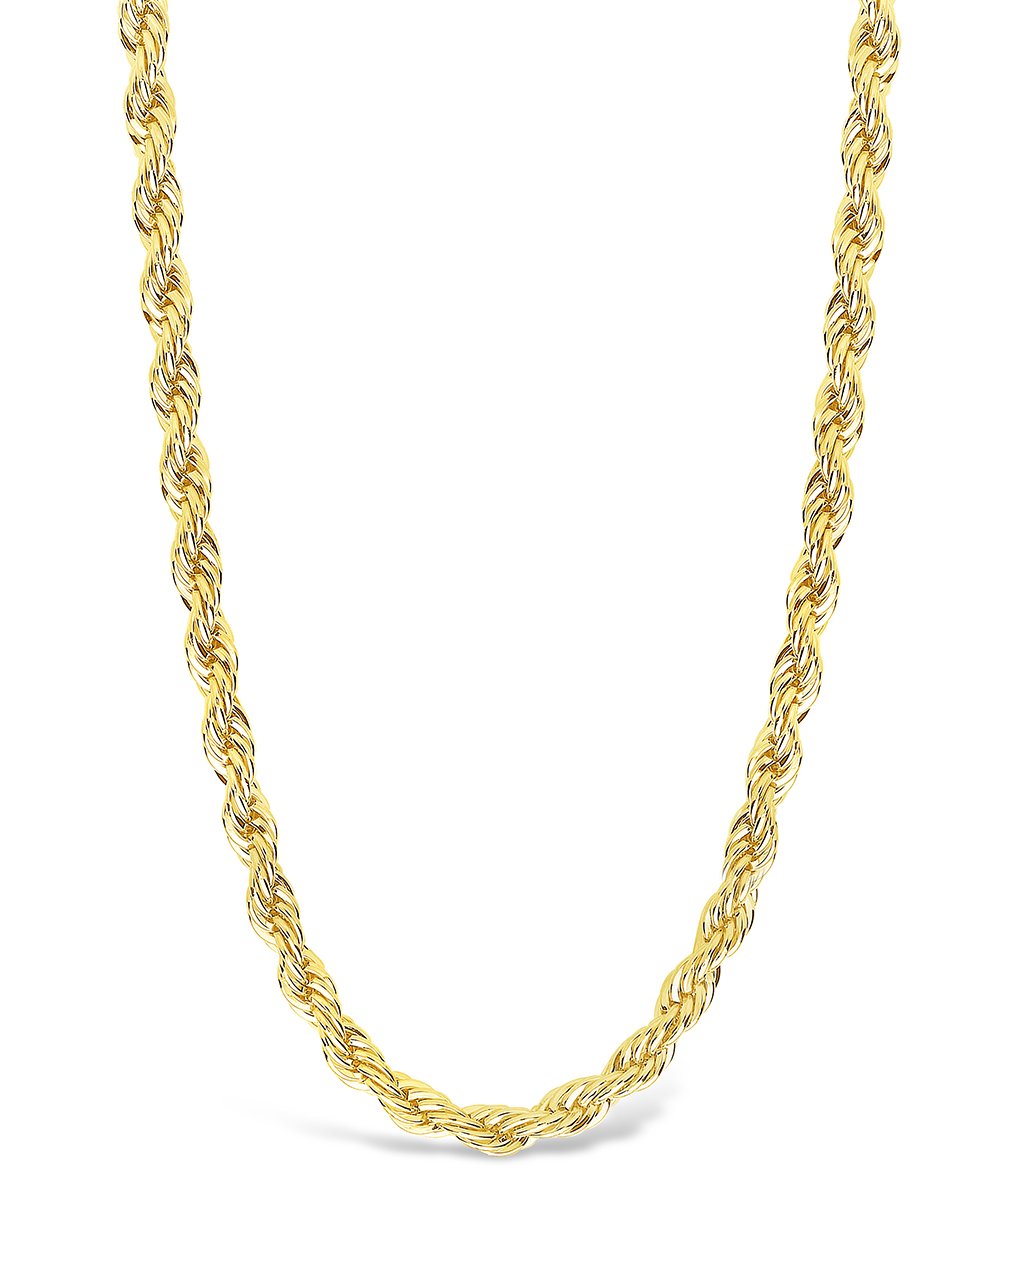 Rope Twist Chain Necklace Sterling Forever Gold 